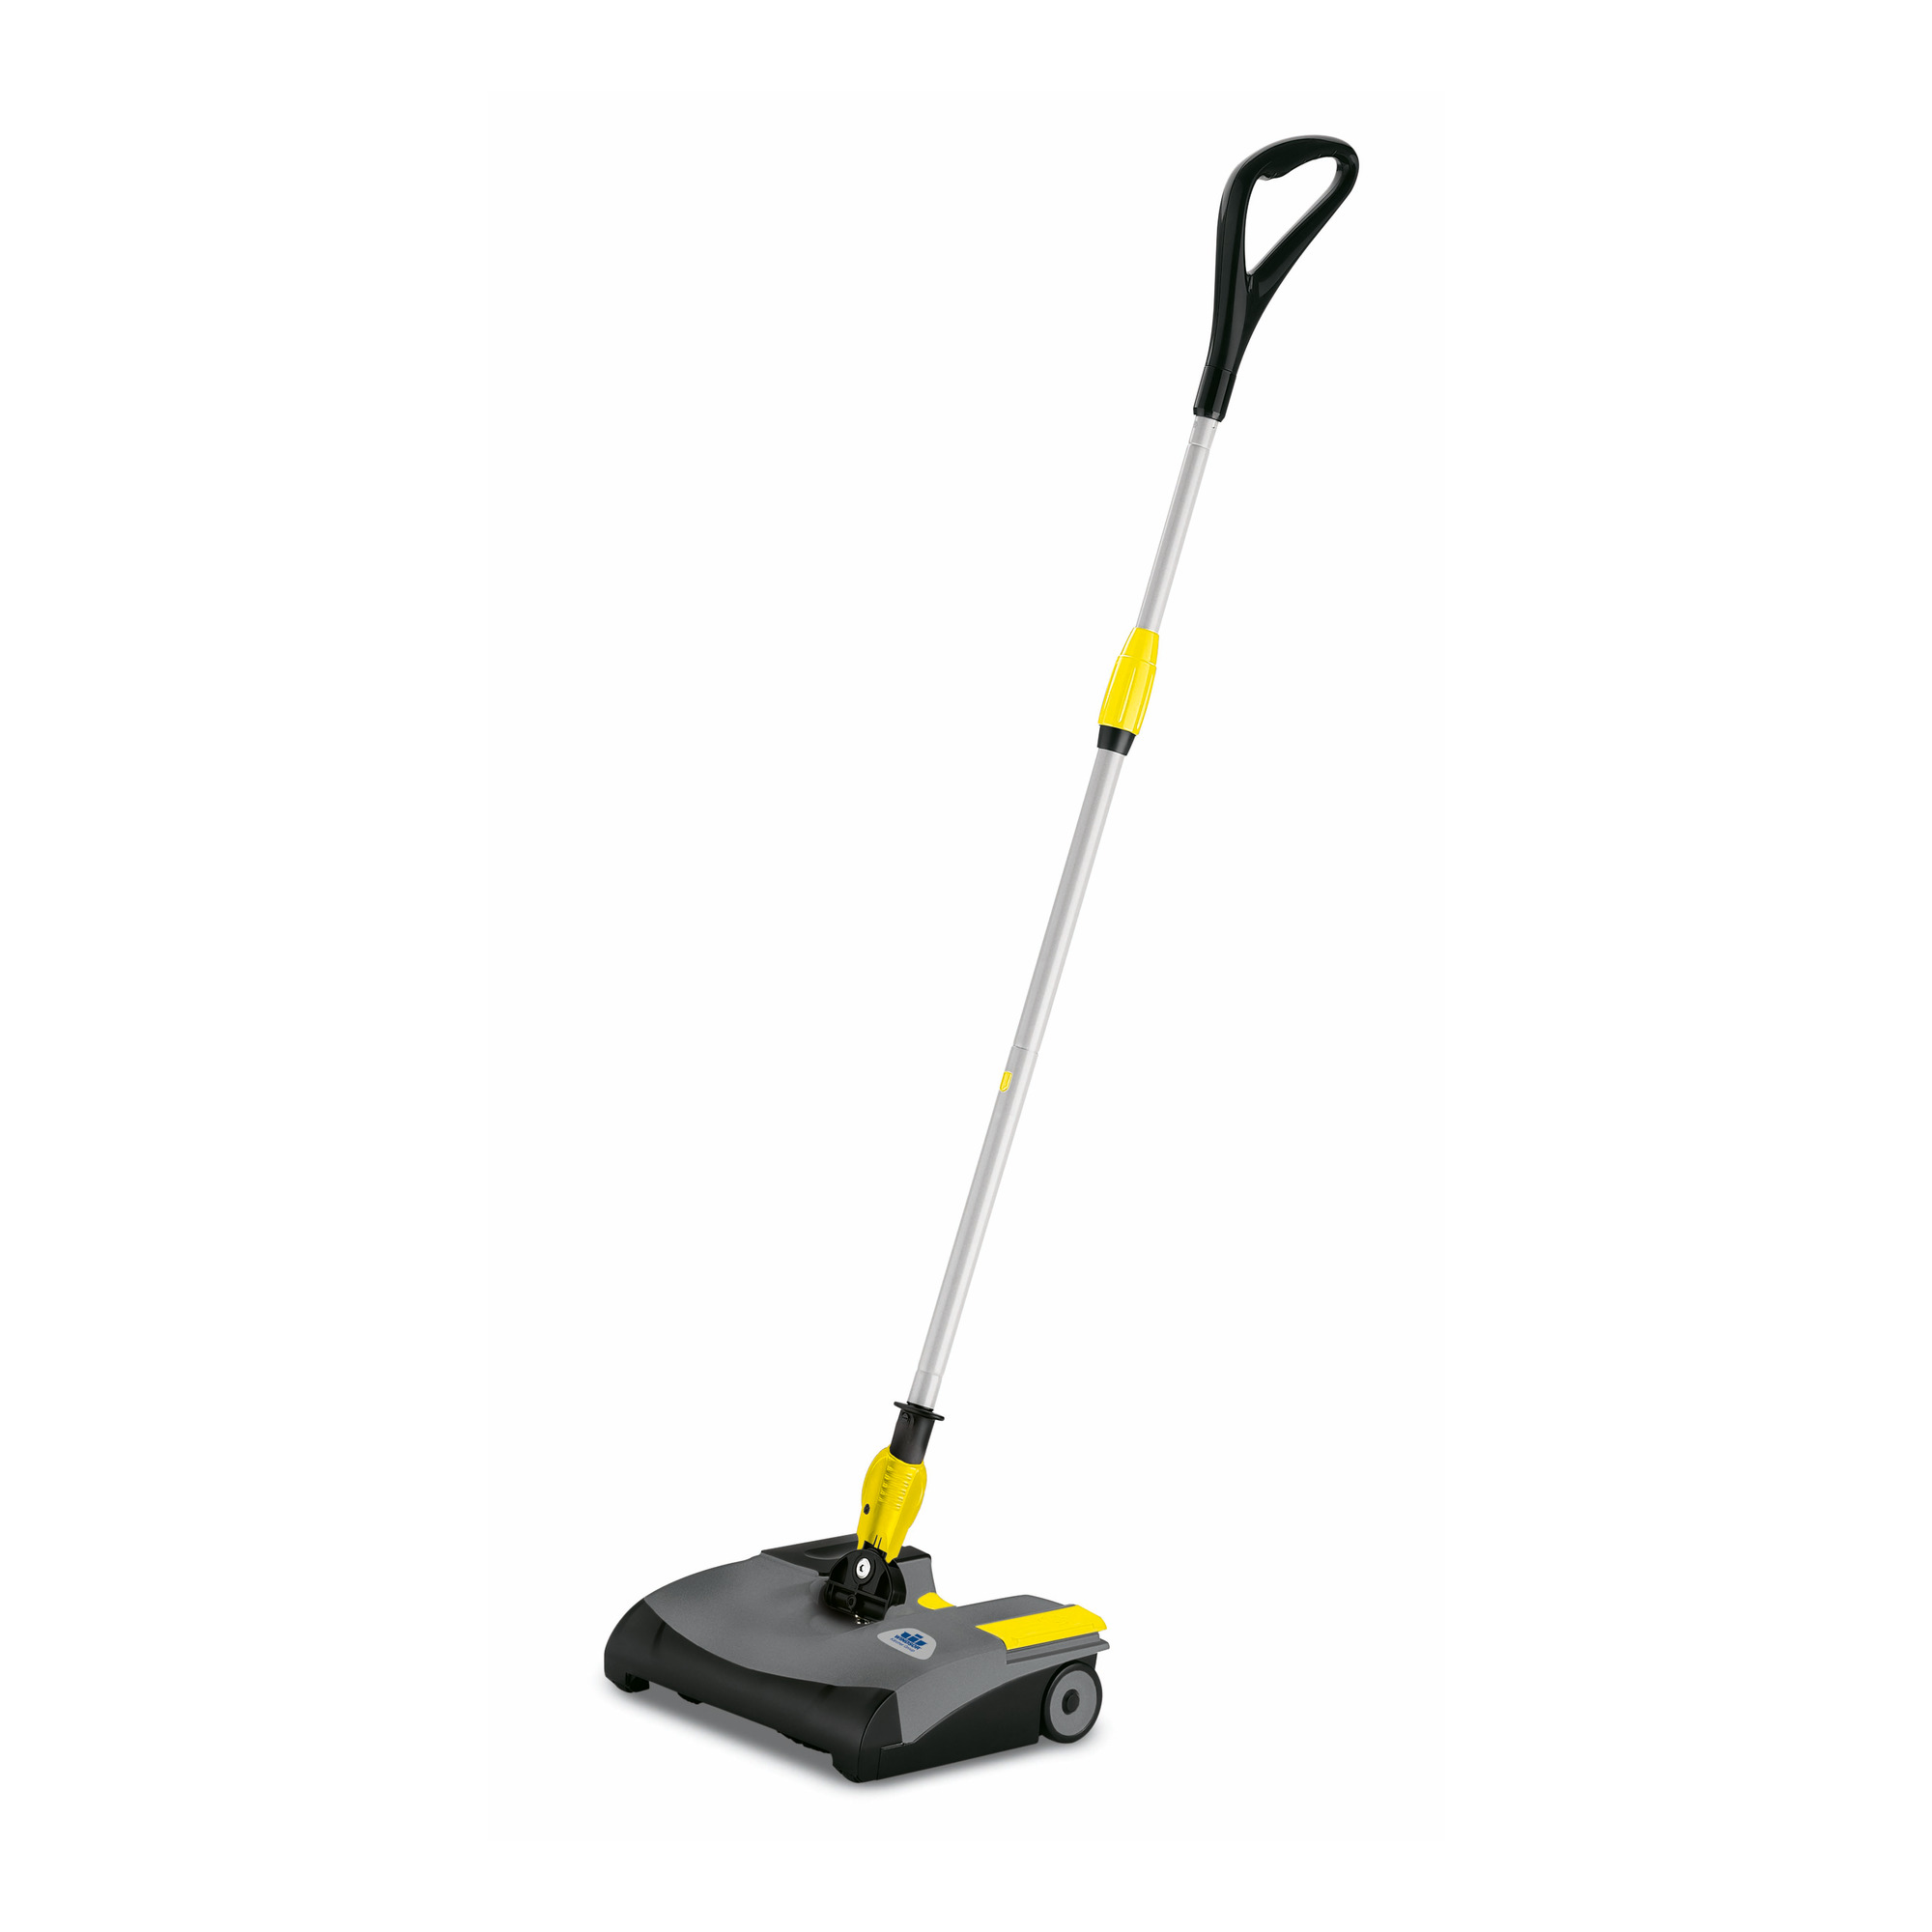 12&quot; RADIUS MINI SWEEPER,
PLUG-IN CHARGER, 7.2V/1.4AH
BATTERY